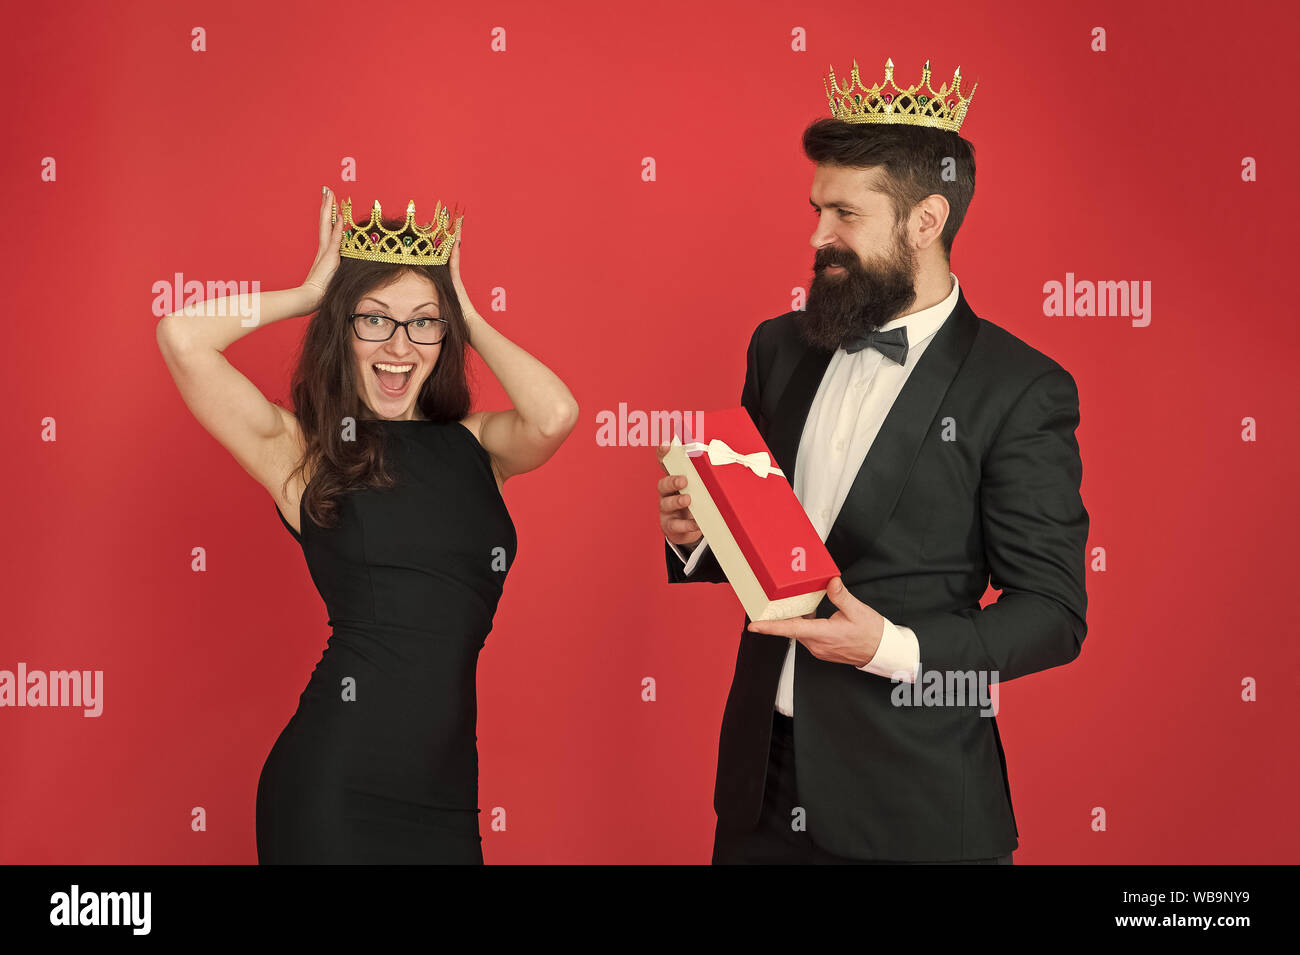 royal couple in love. date. business success. business fashion. anniversary party gift. Formal business couple. man in tuxedo and woman. Bearded man and happy woman in crown. Successful professional. Stock Photo